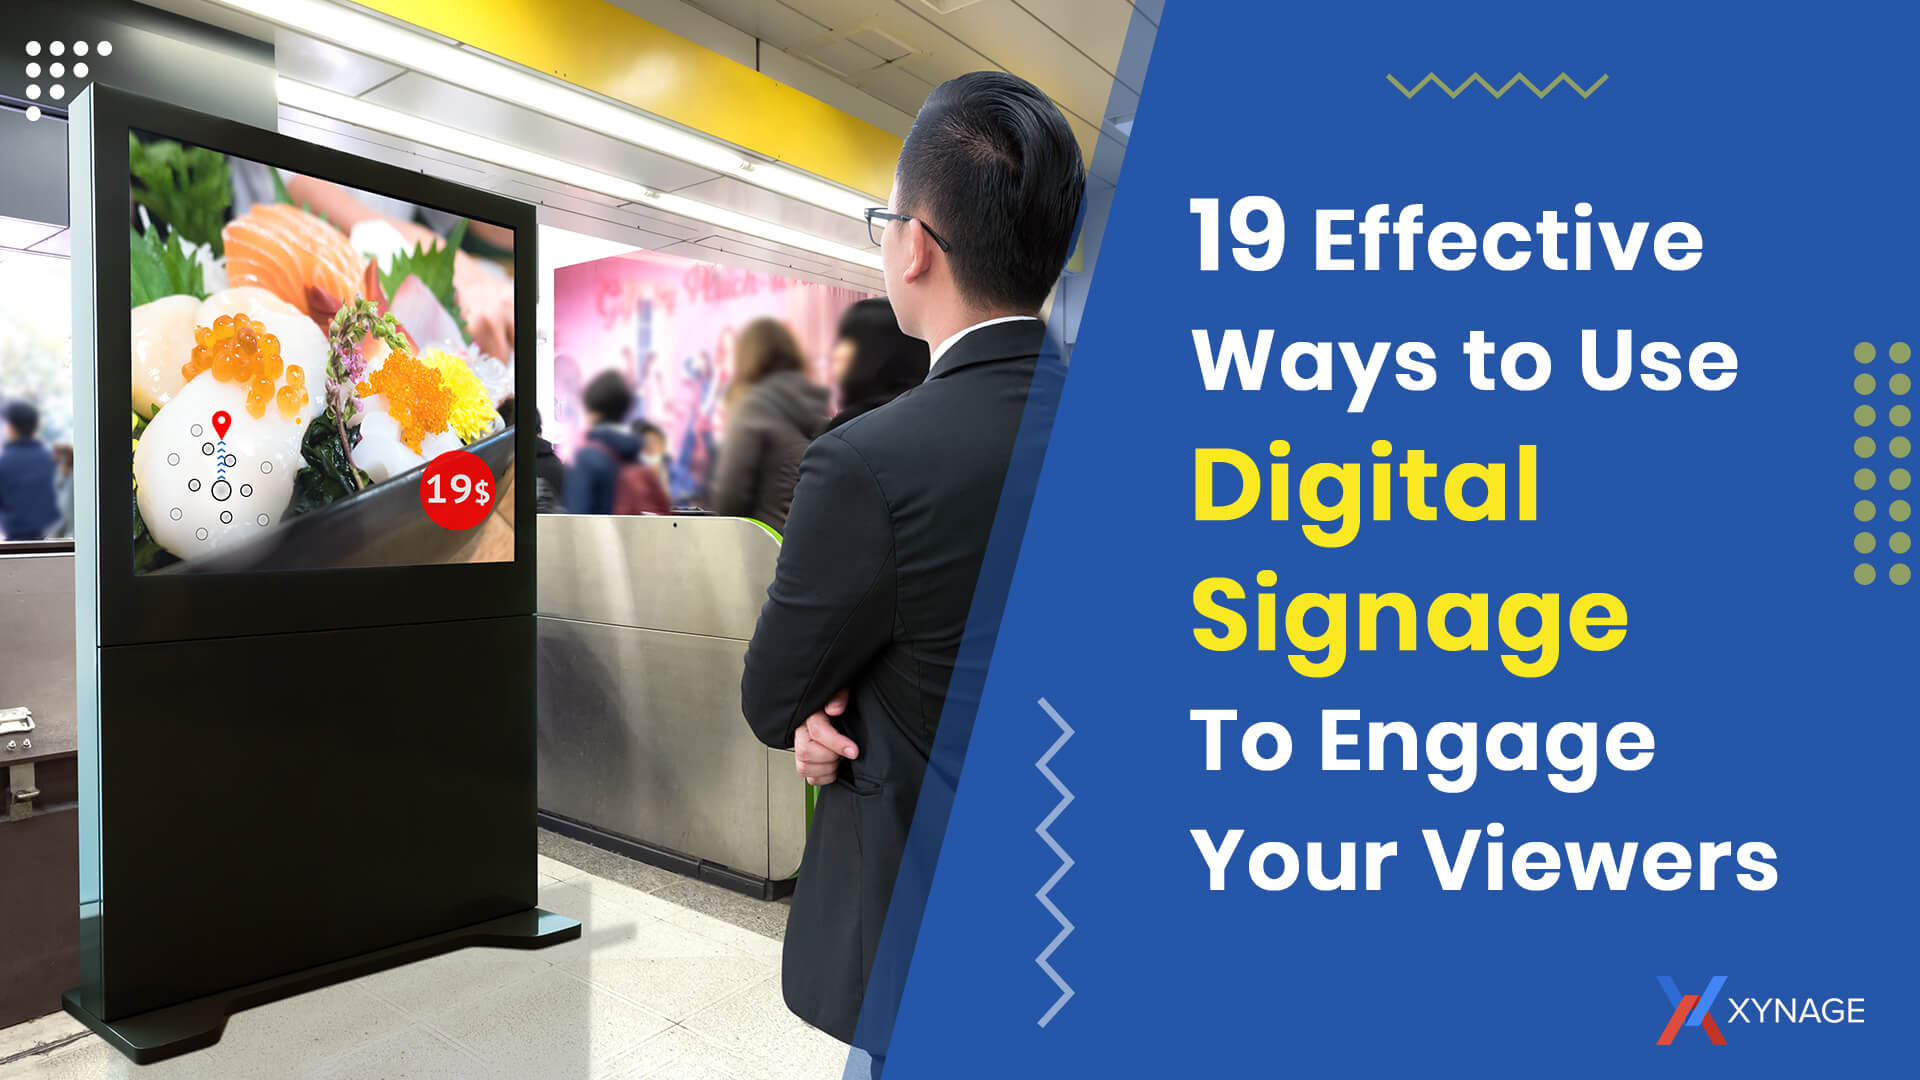 19 Effective Ways to Use Digital Signage To Engage Your Viewers